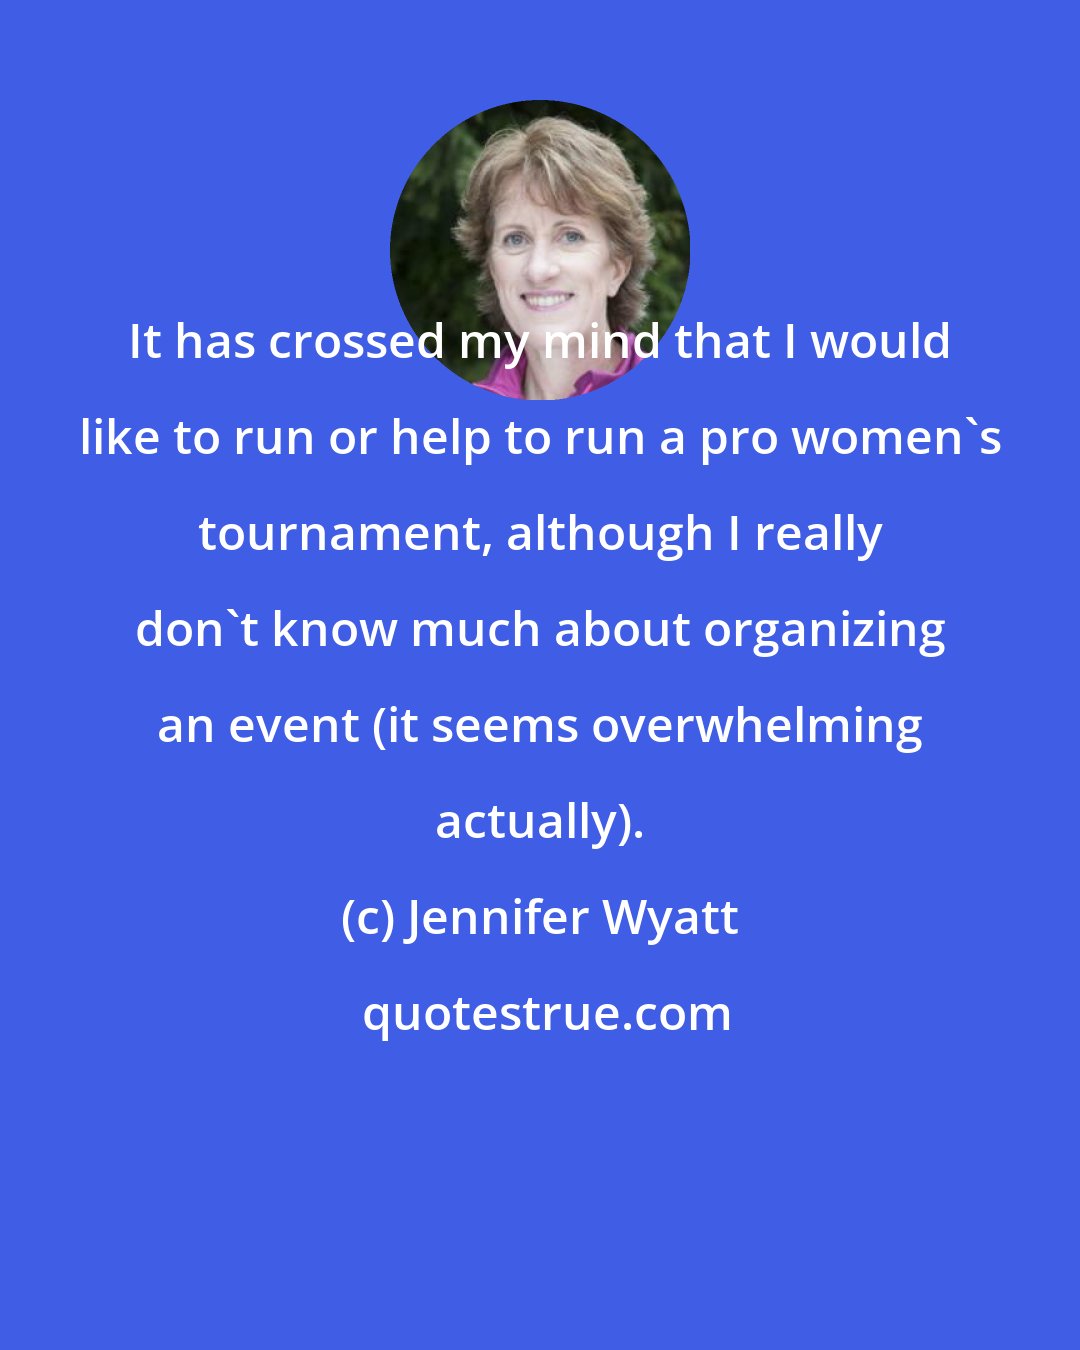 Jennifer Wyatt: It has crossed my mind that I would like to run or help to run a pro women's tournament, although I really don't know much about organizing an event (it seems overwhelming actually).